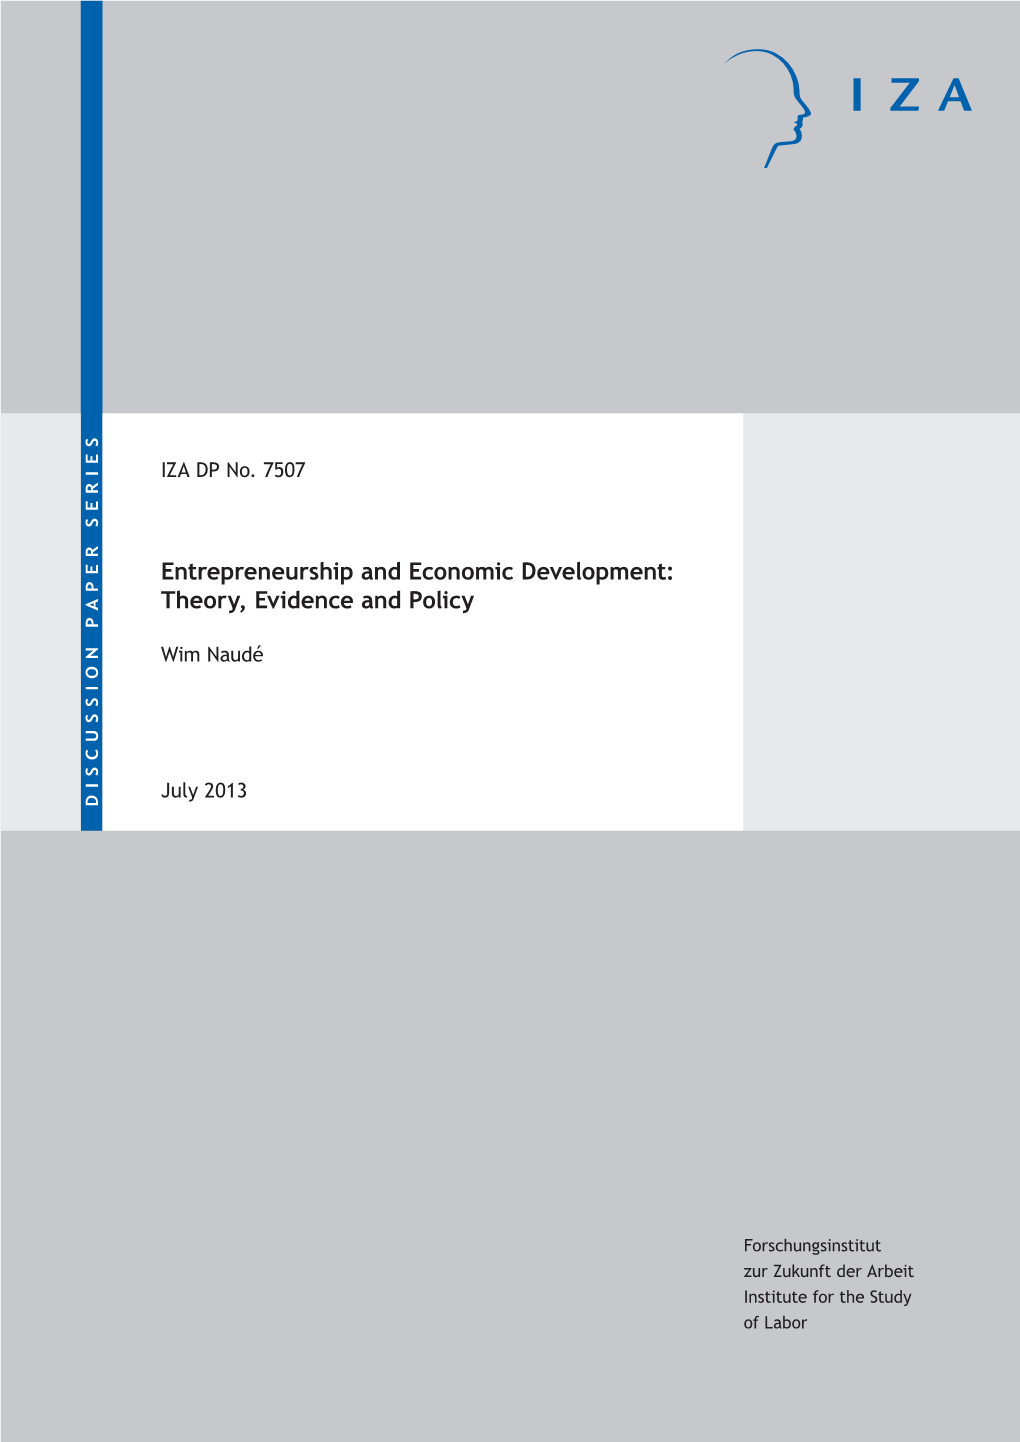 Entrepreneurship and Economic Development: Theory, Evidence and Policy